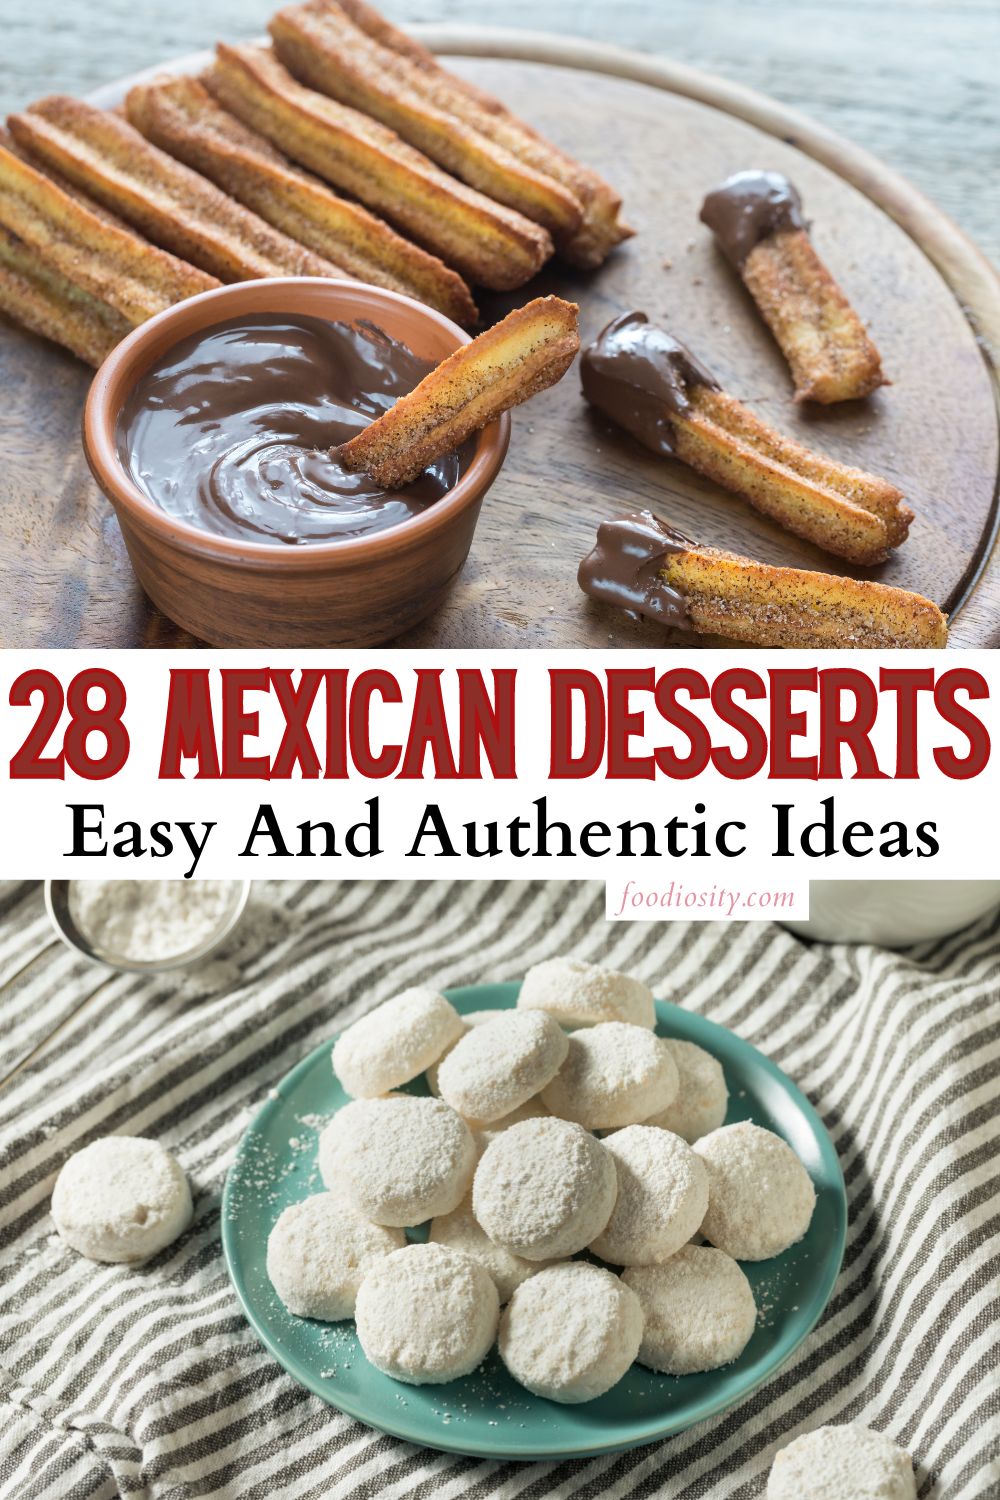 28 Mexican Desserts 1